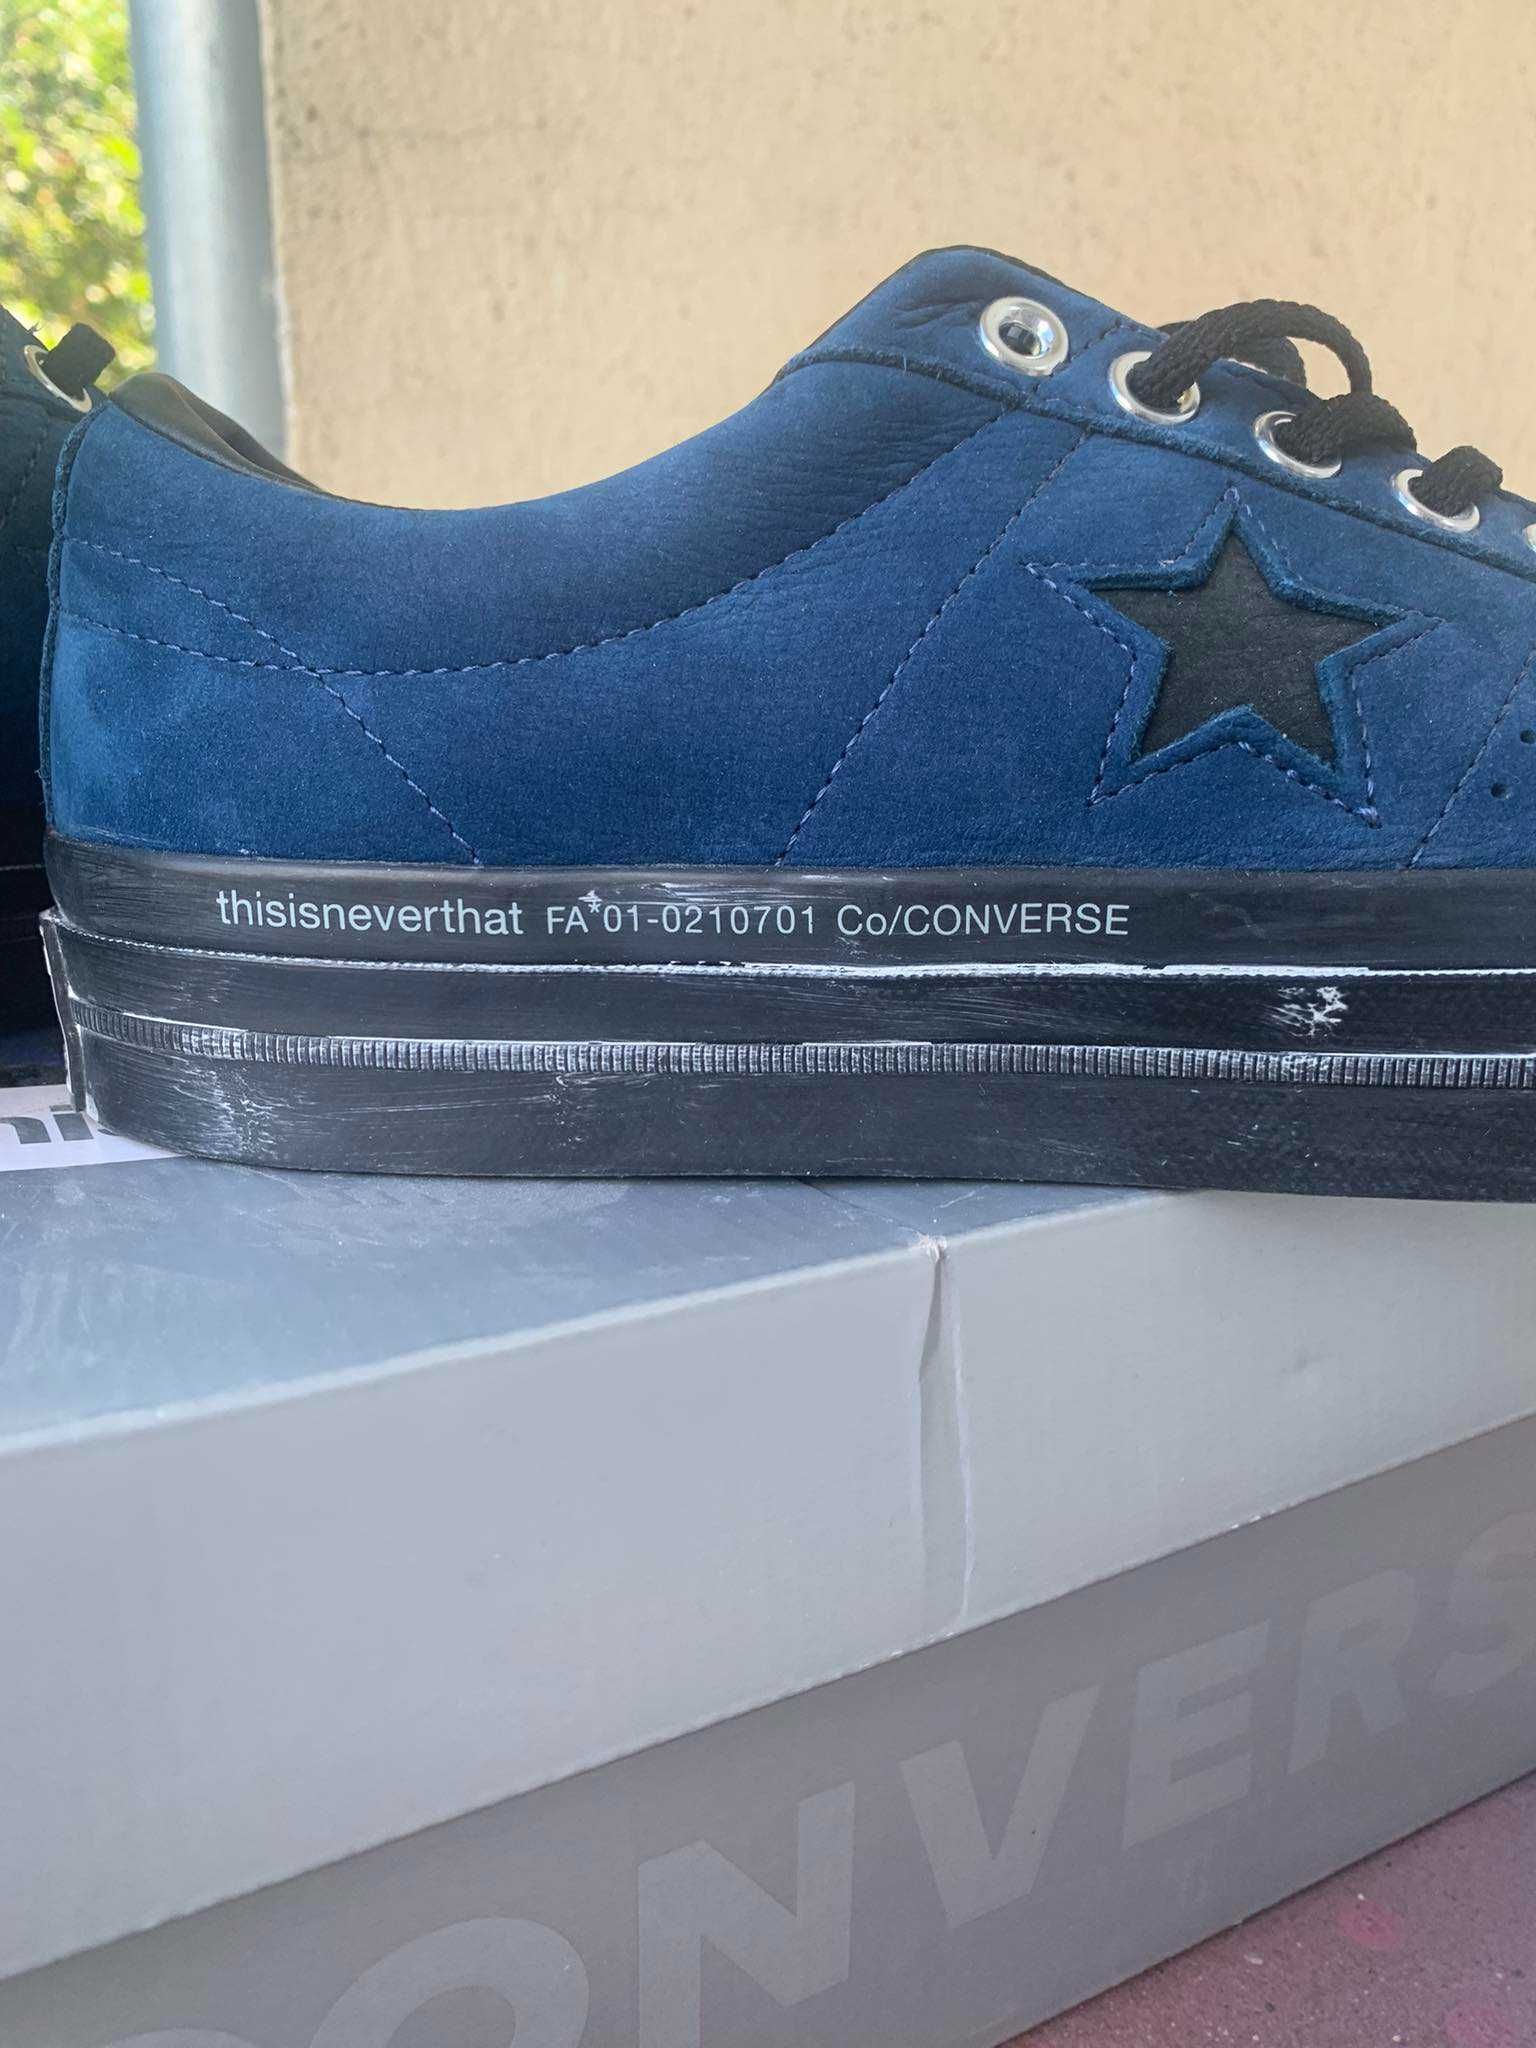 Converse One Star x ThisIsNeverThat 45 Номер